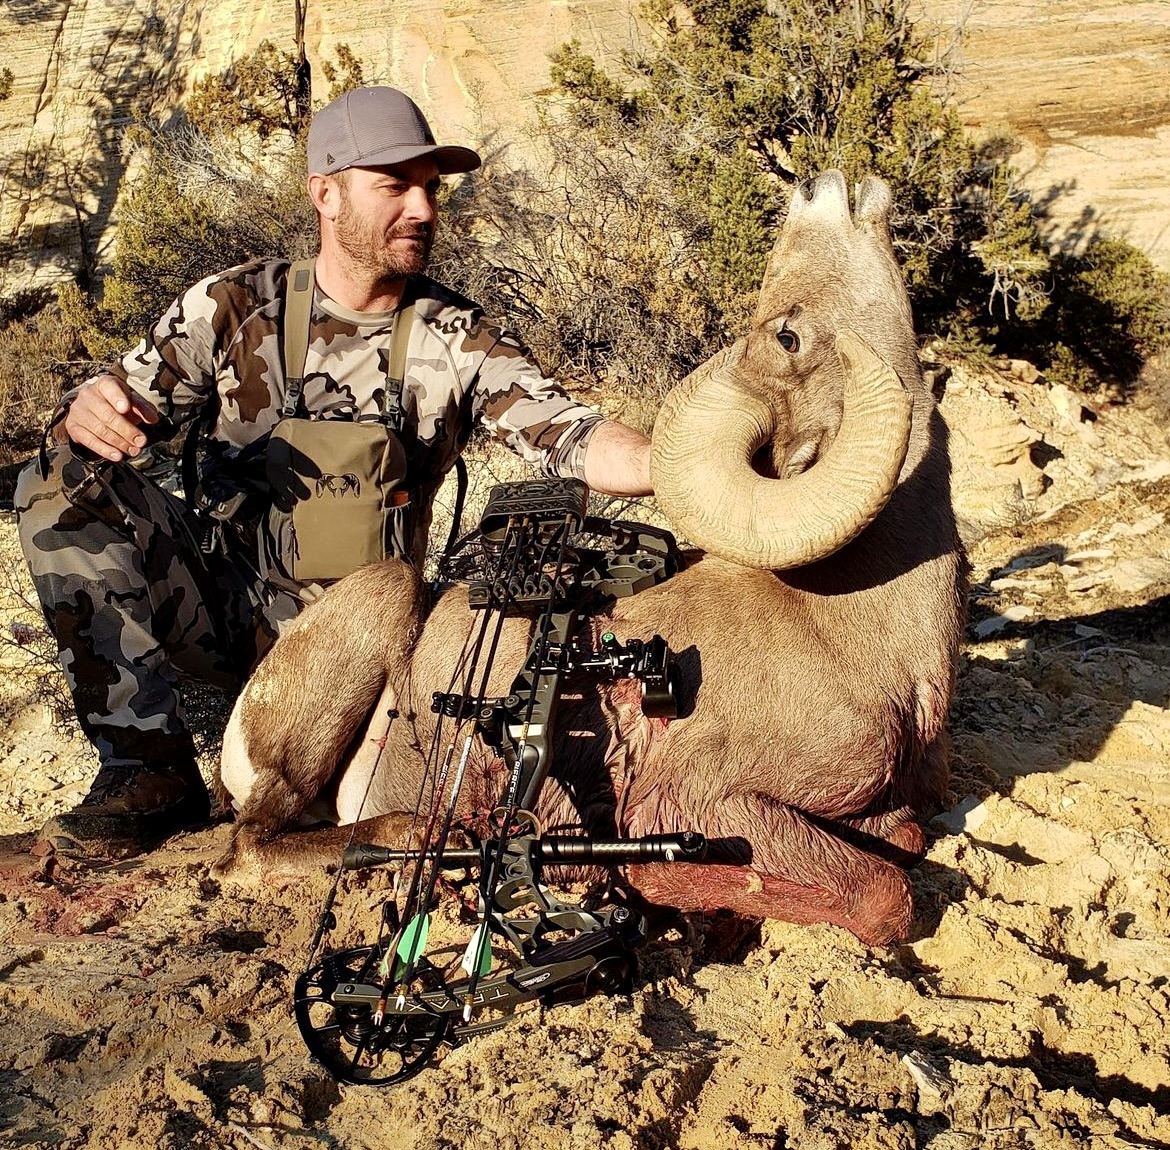 Archery ram from the Zion unit